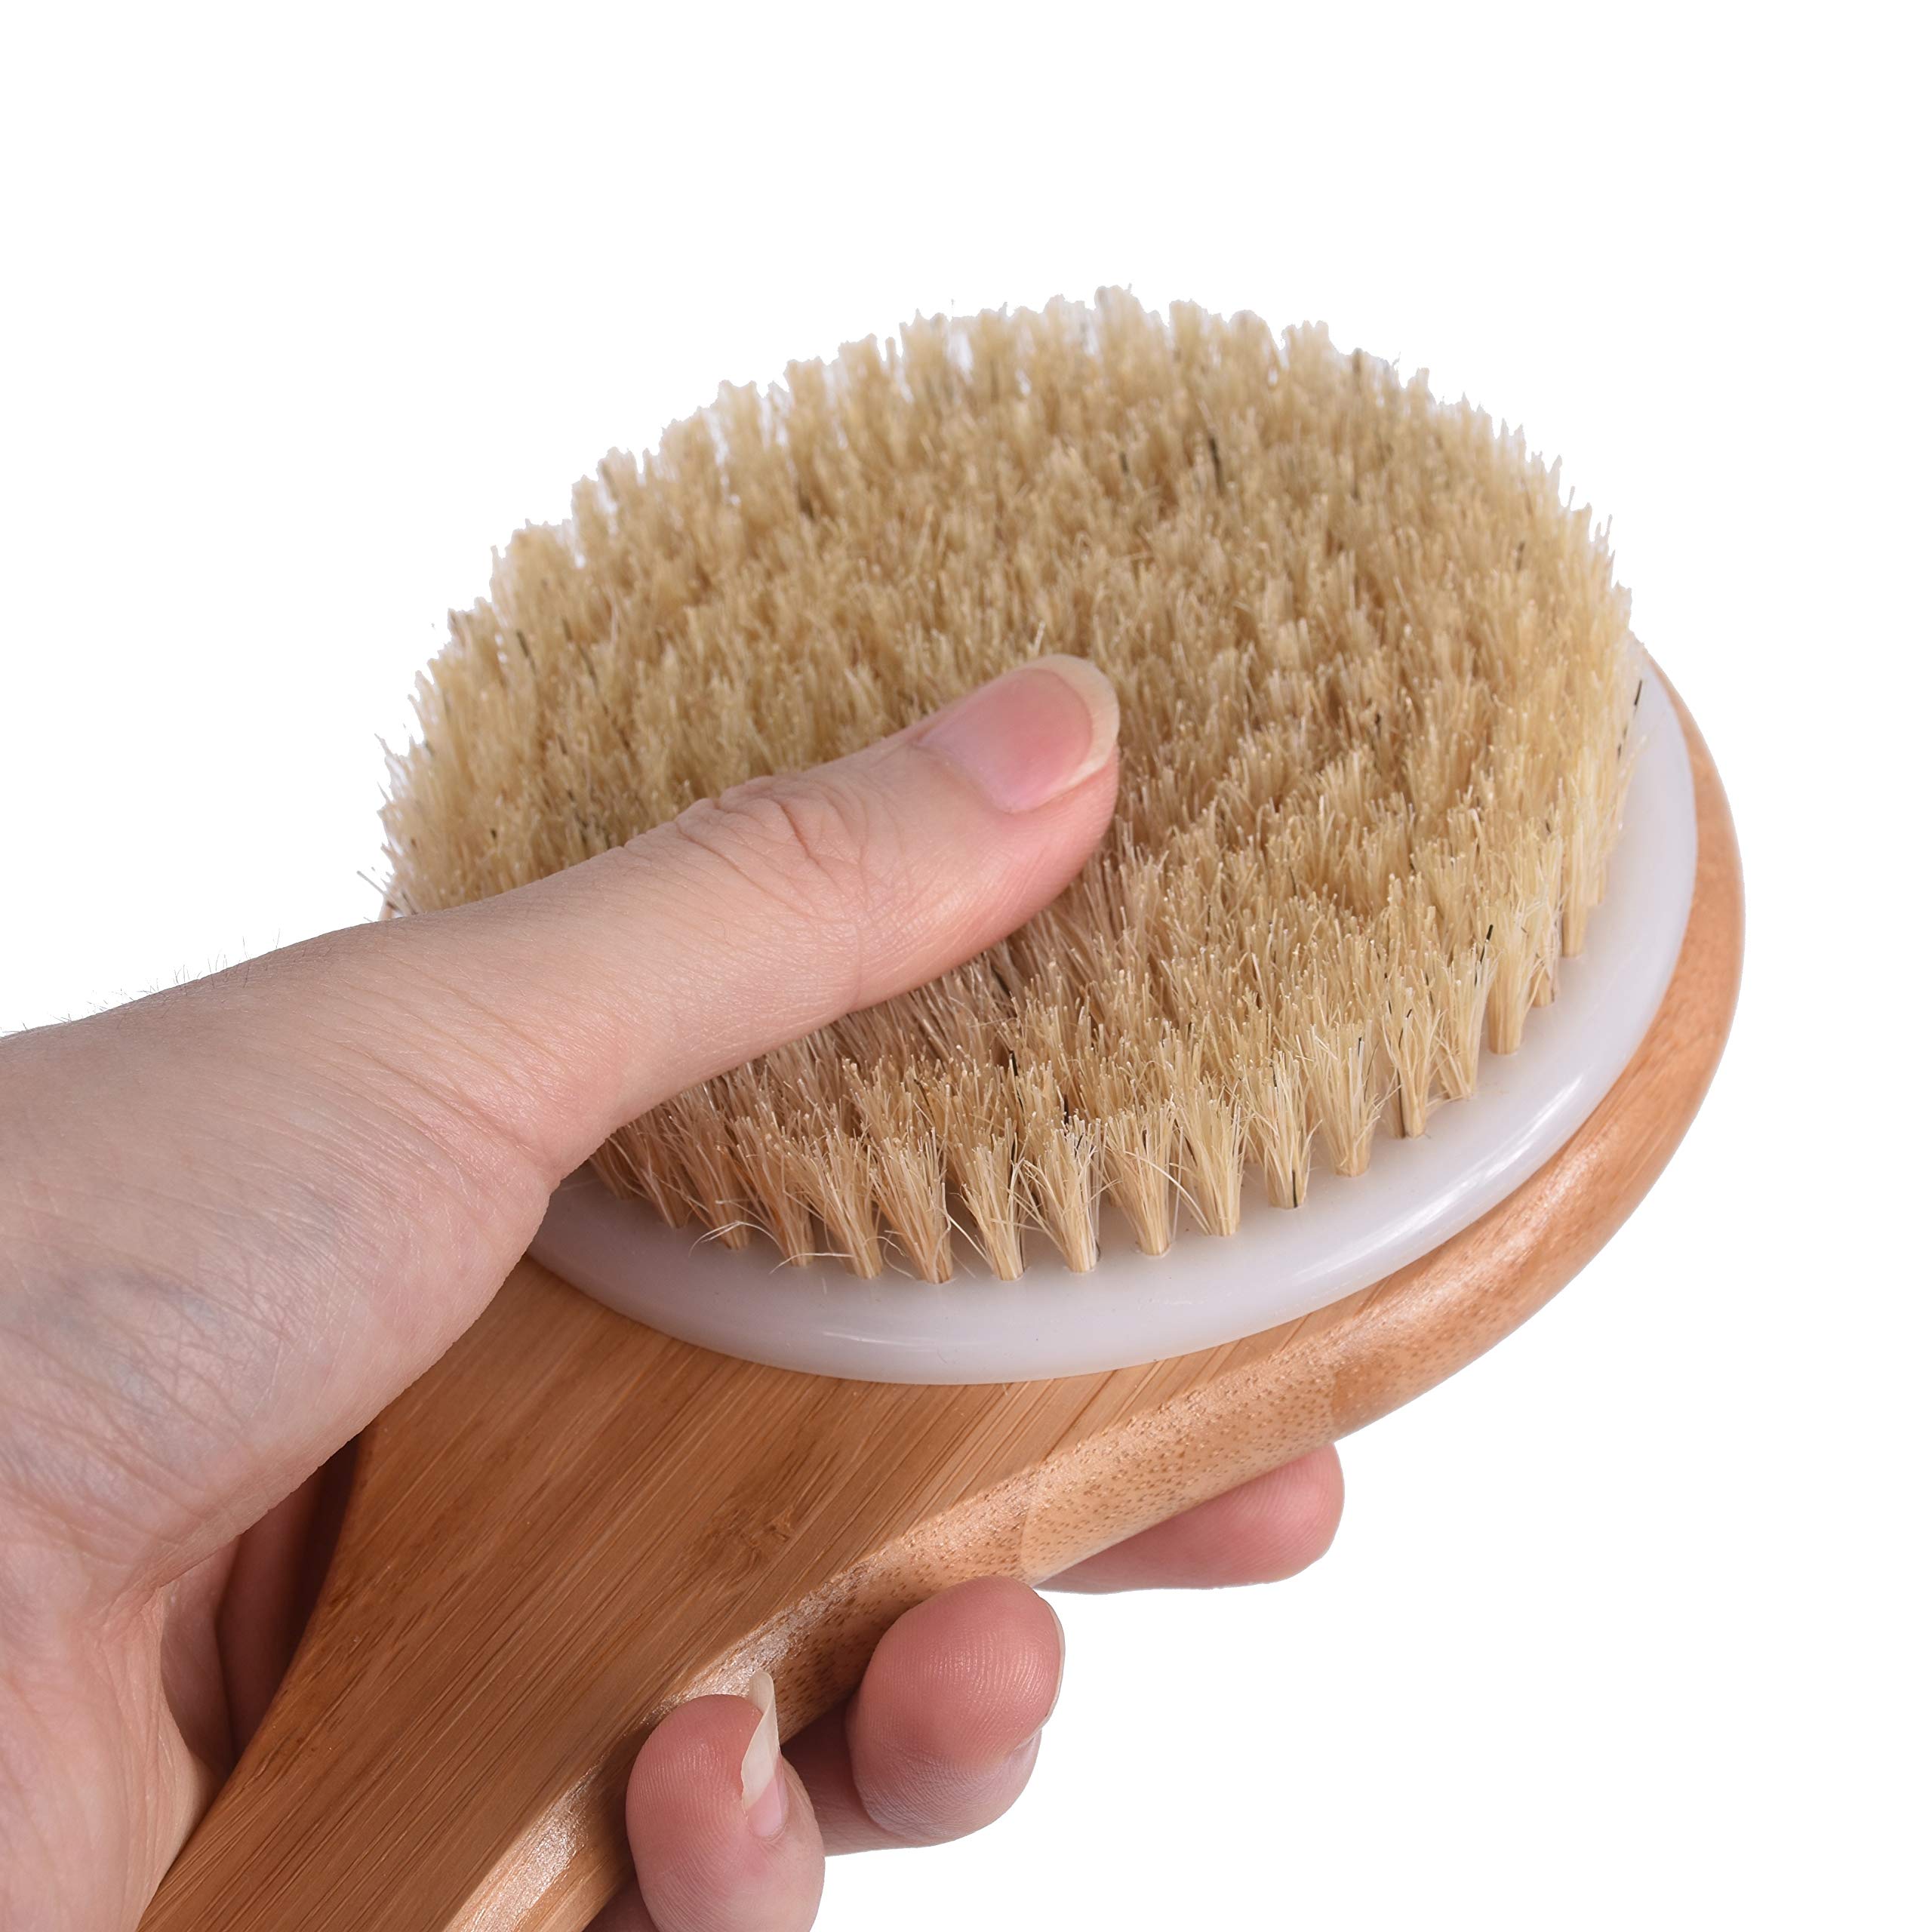 Chikoni Dry Bath Body Brush Back Scrubber with Anti-Slip Long Wooden Handle, 100% Natural Bristles Body Massager, Perfect for Exfoliating, Detox and Cellulite, Blood Circulation, Good for Health